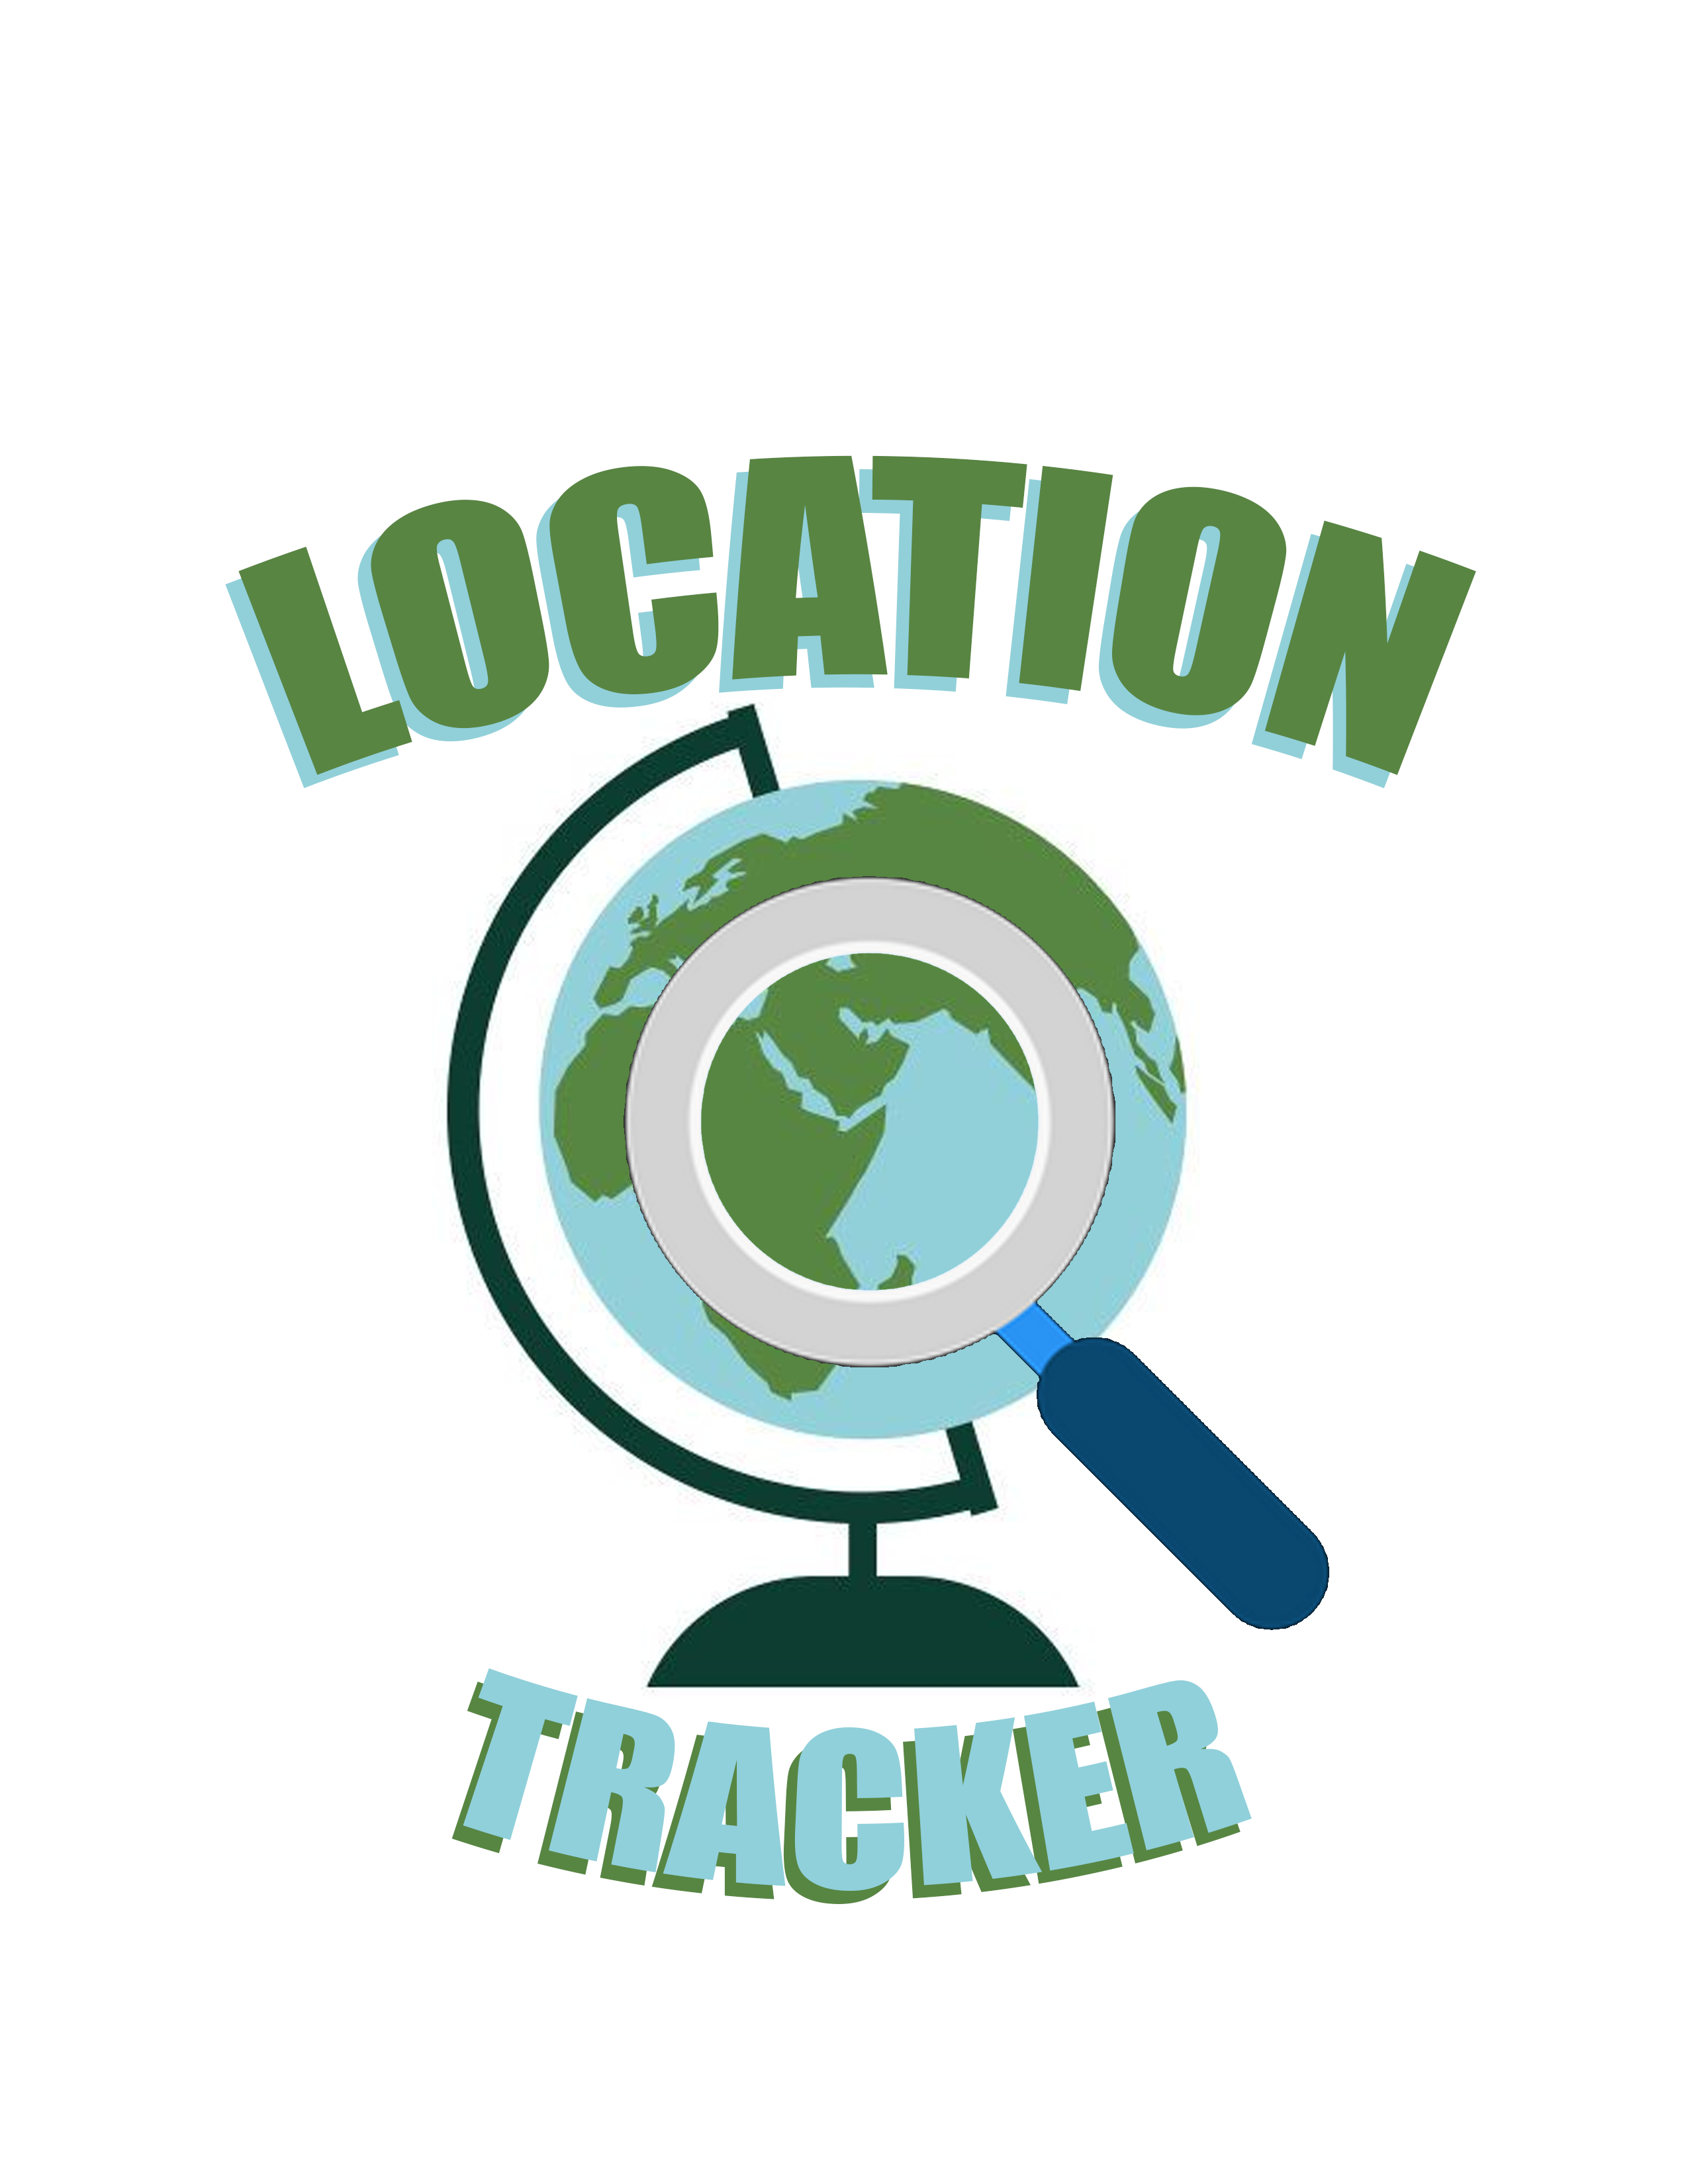 Location Tracker by EjShaps